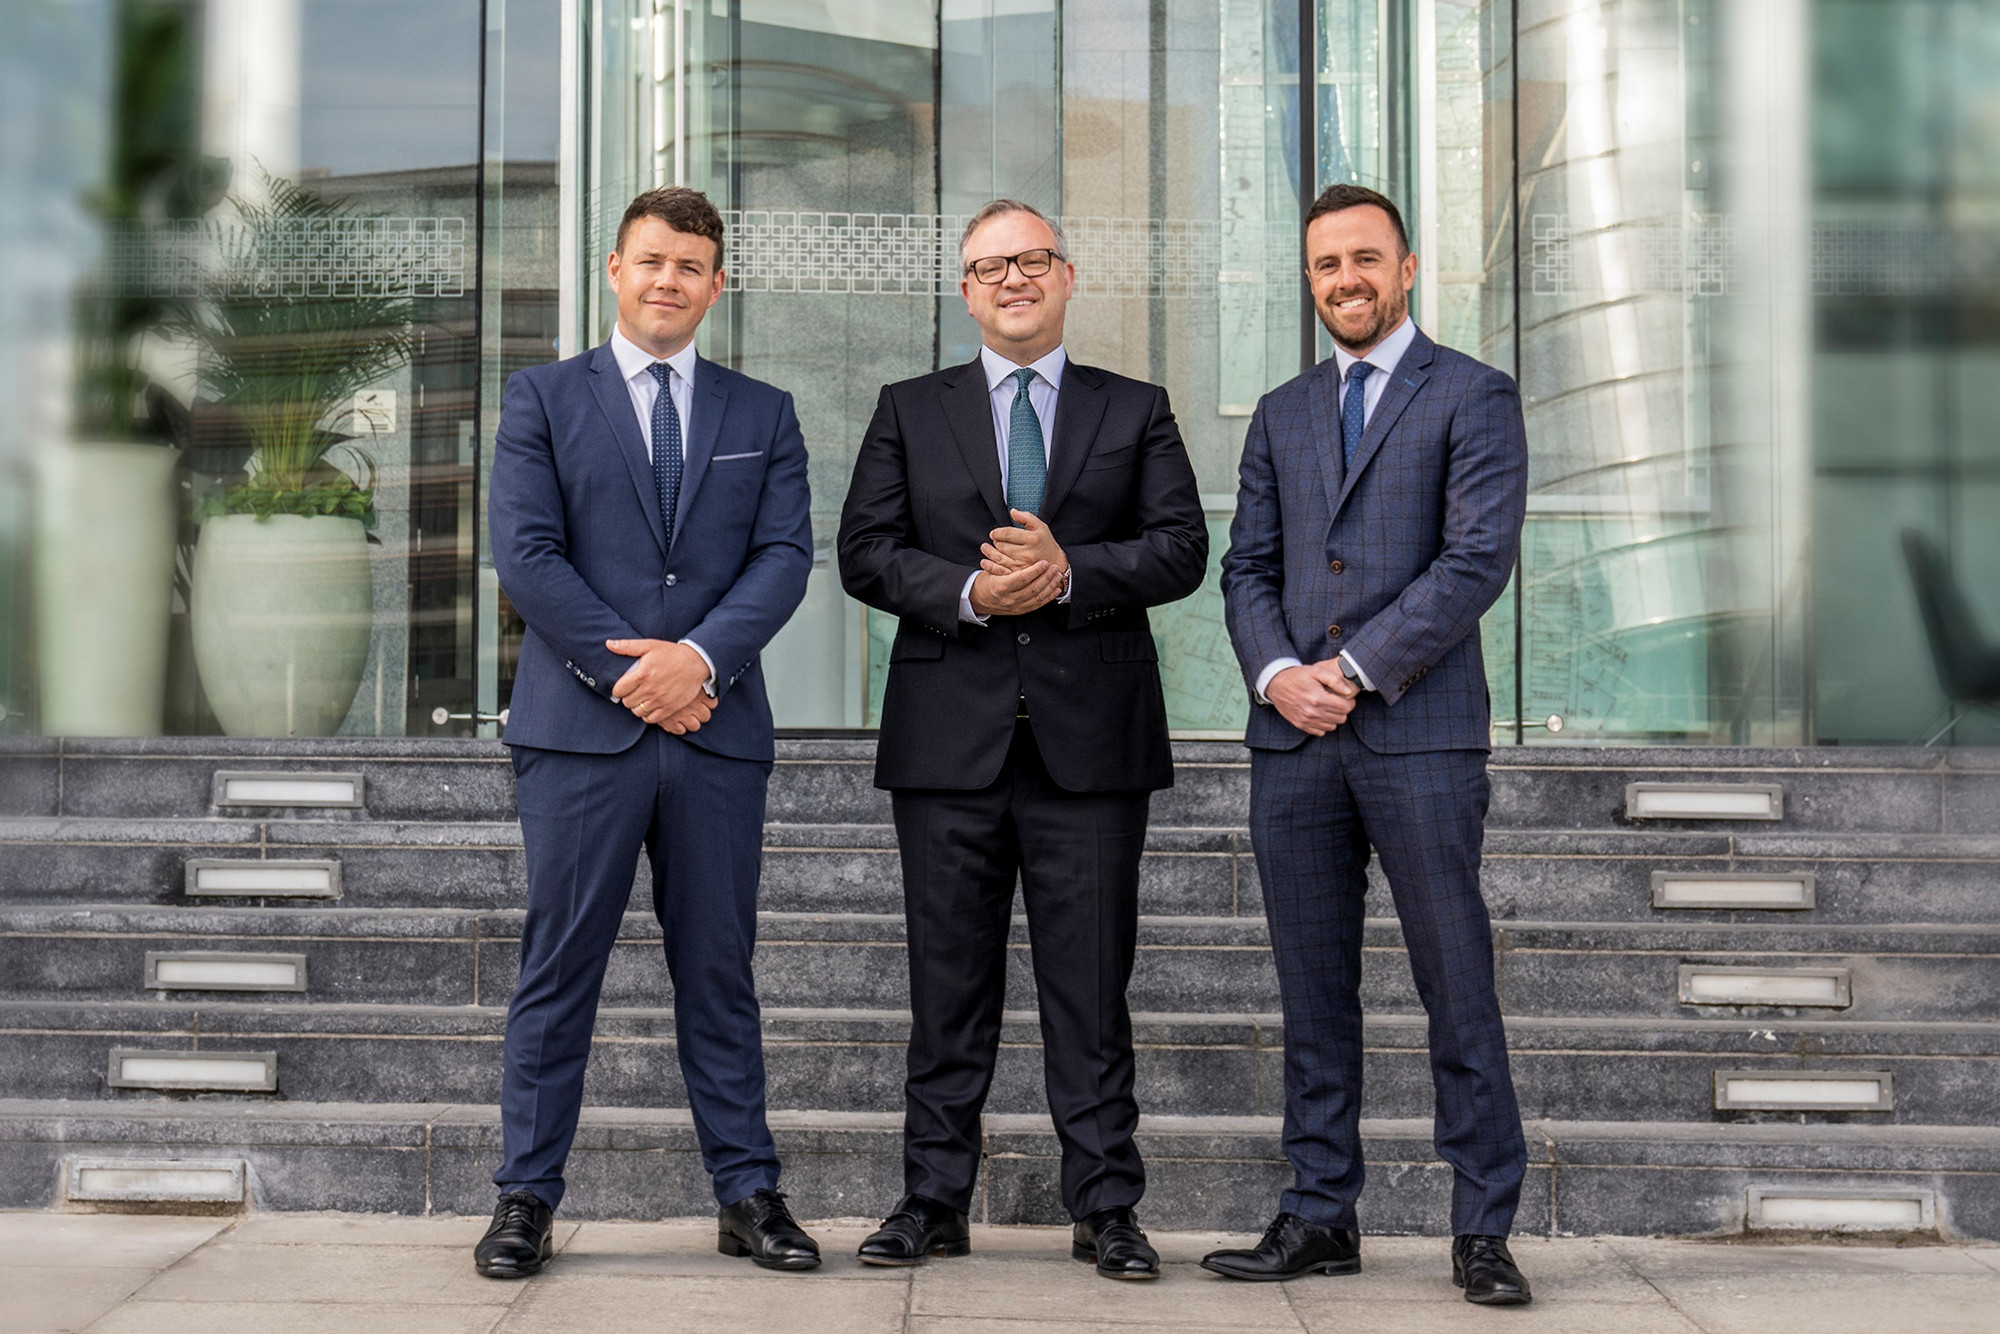 Two new partners at Beauchamps